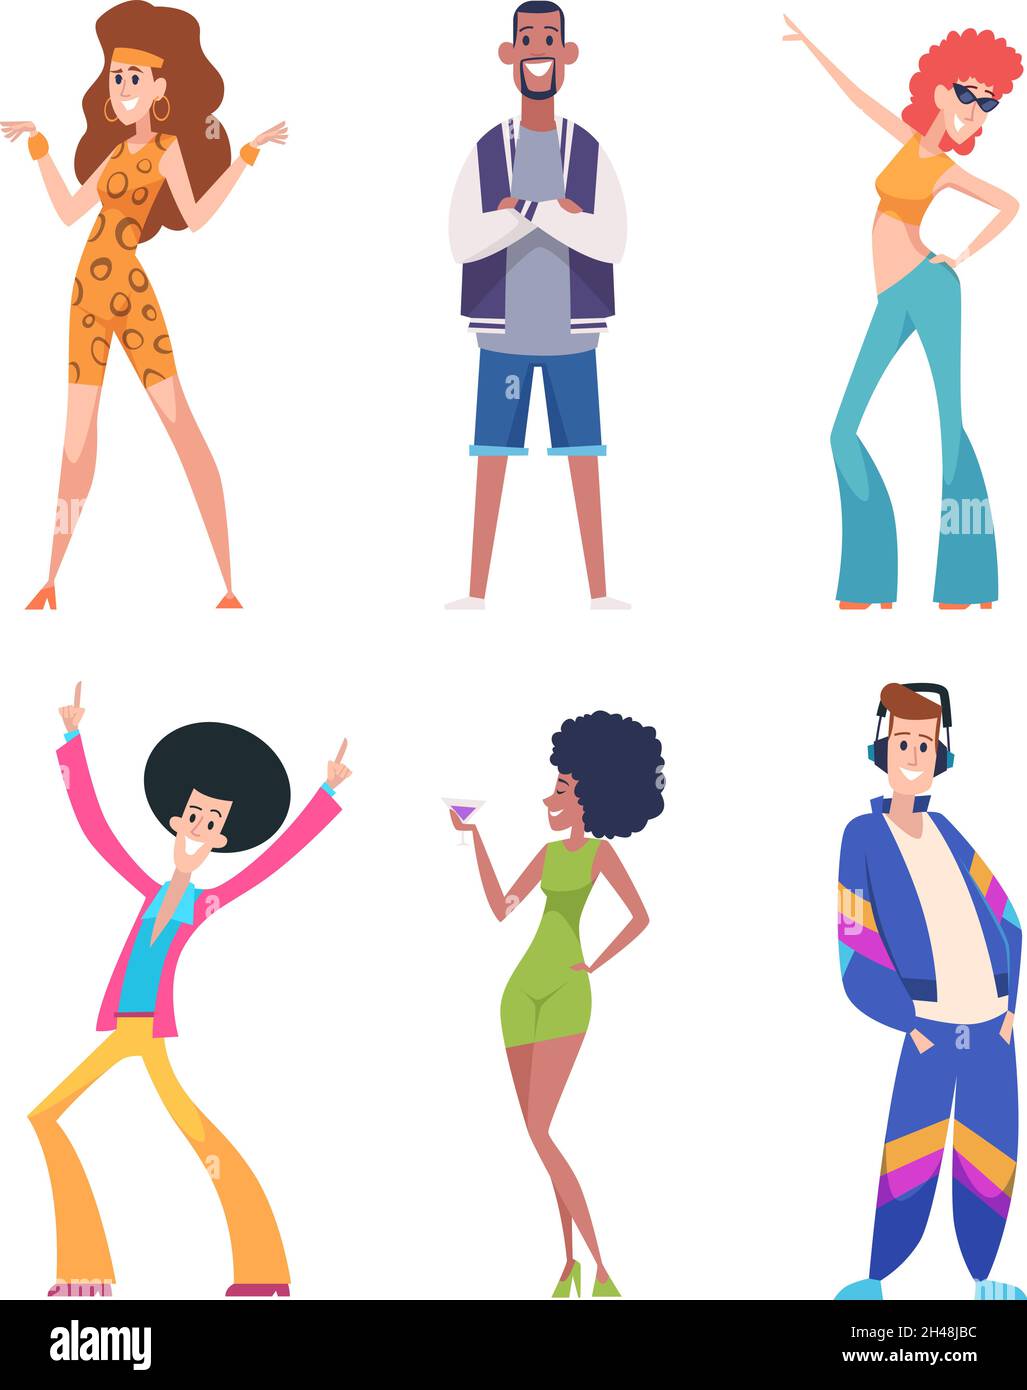 80s fashion man Cut Out Stock Images & Pictures - Alamy